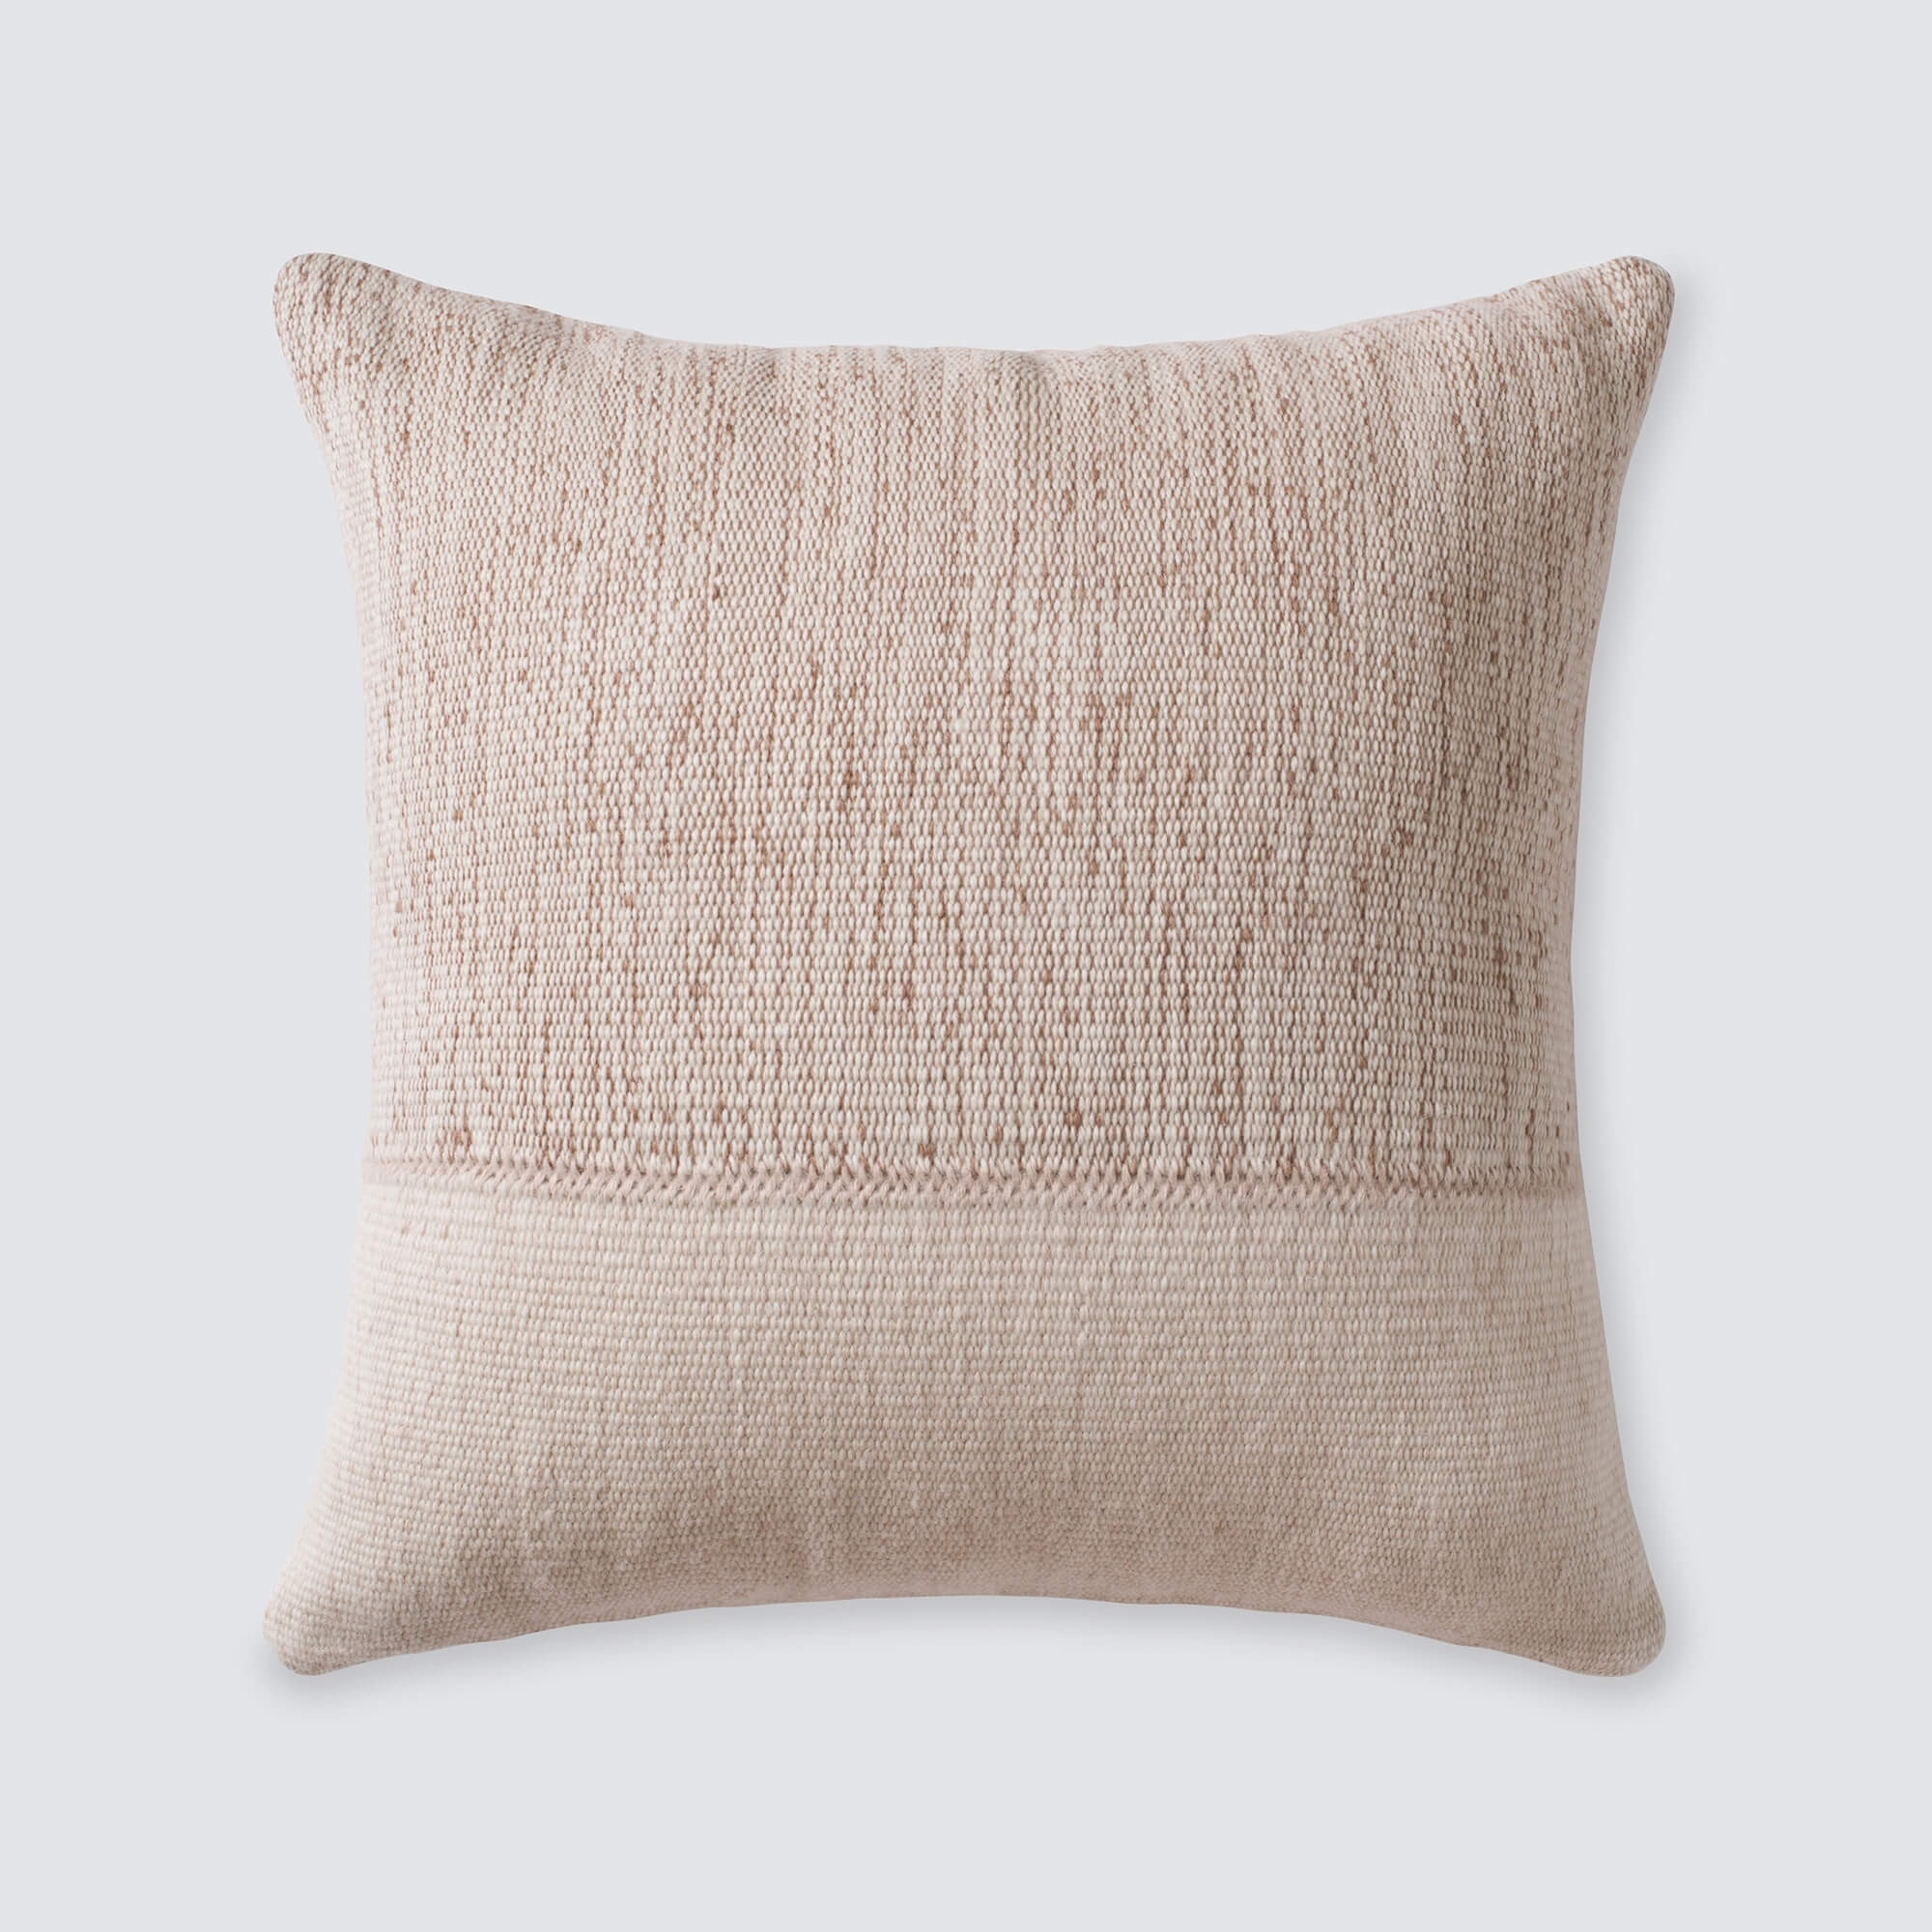 The Citizenry Claro Pillow | 20" x 20" | Grey - Image 1